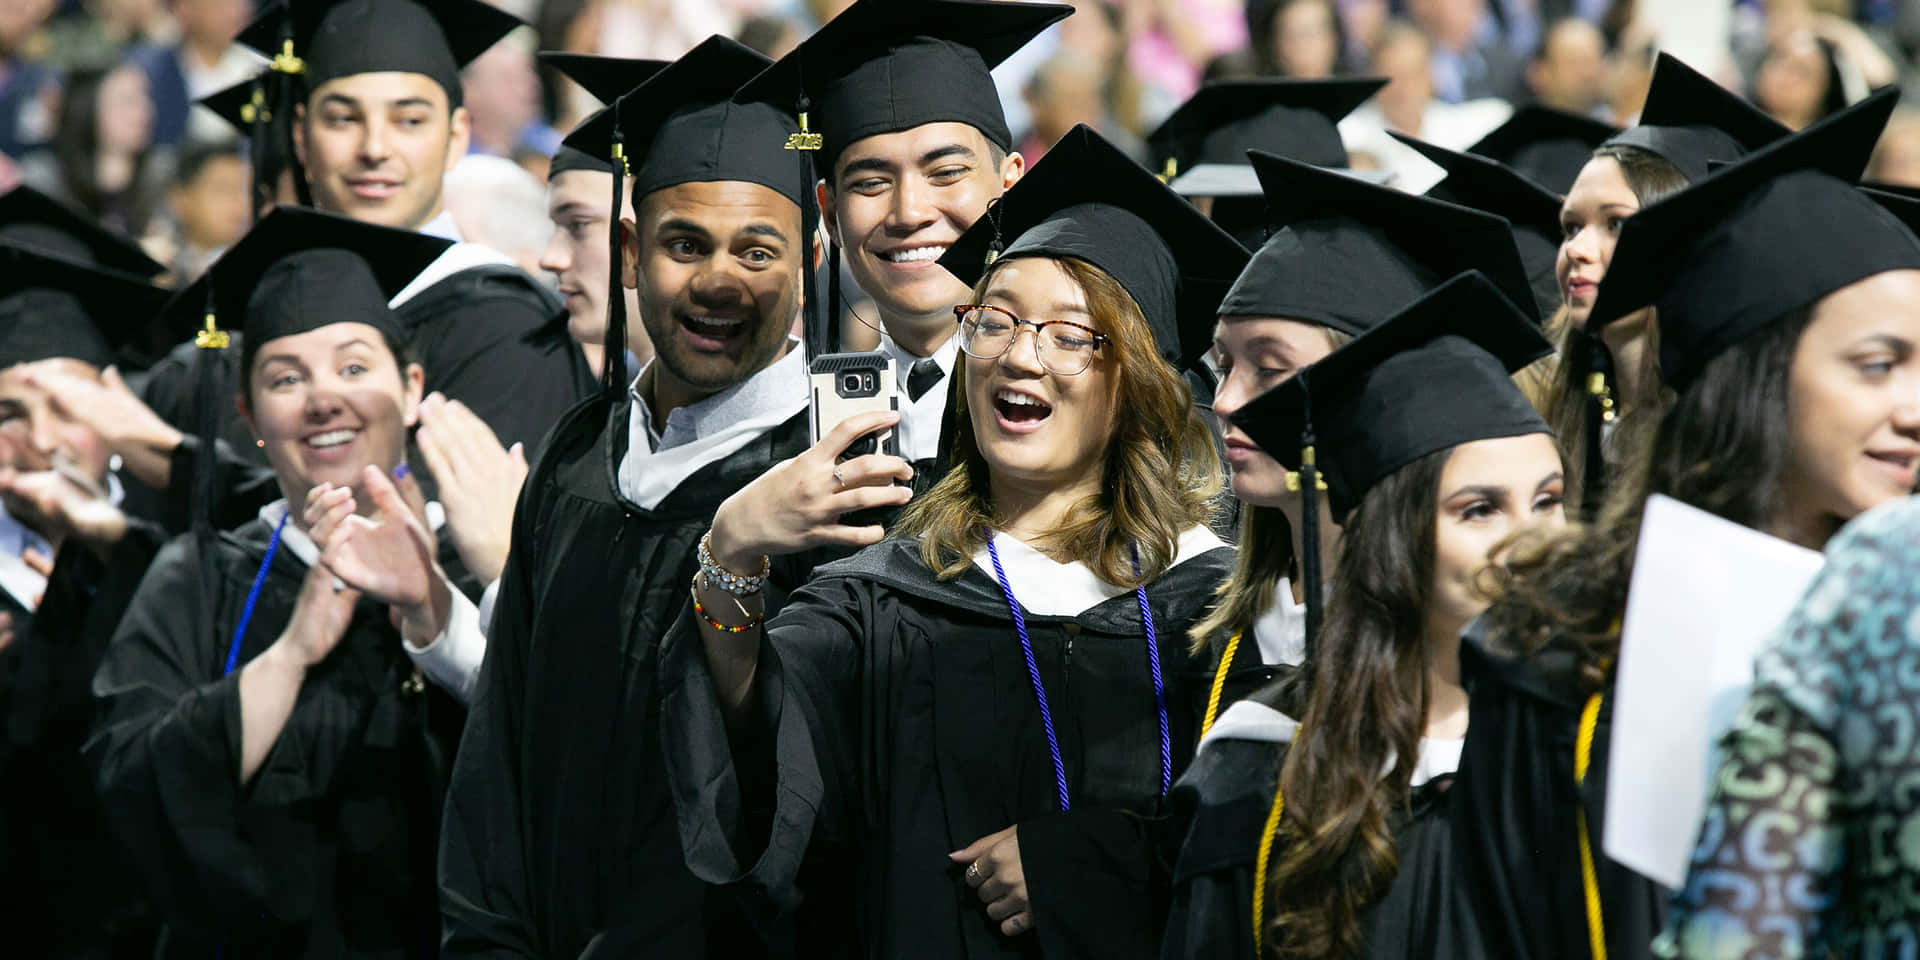 A Group Of Graduates Taking A Selfie